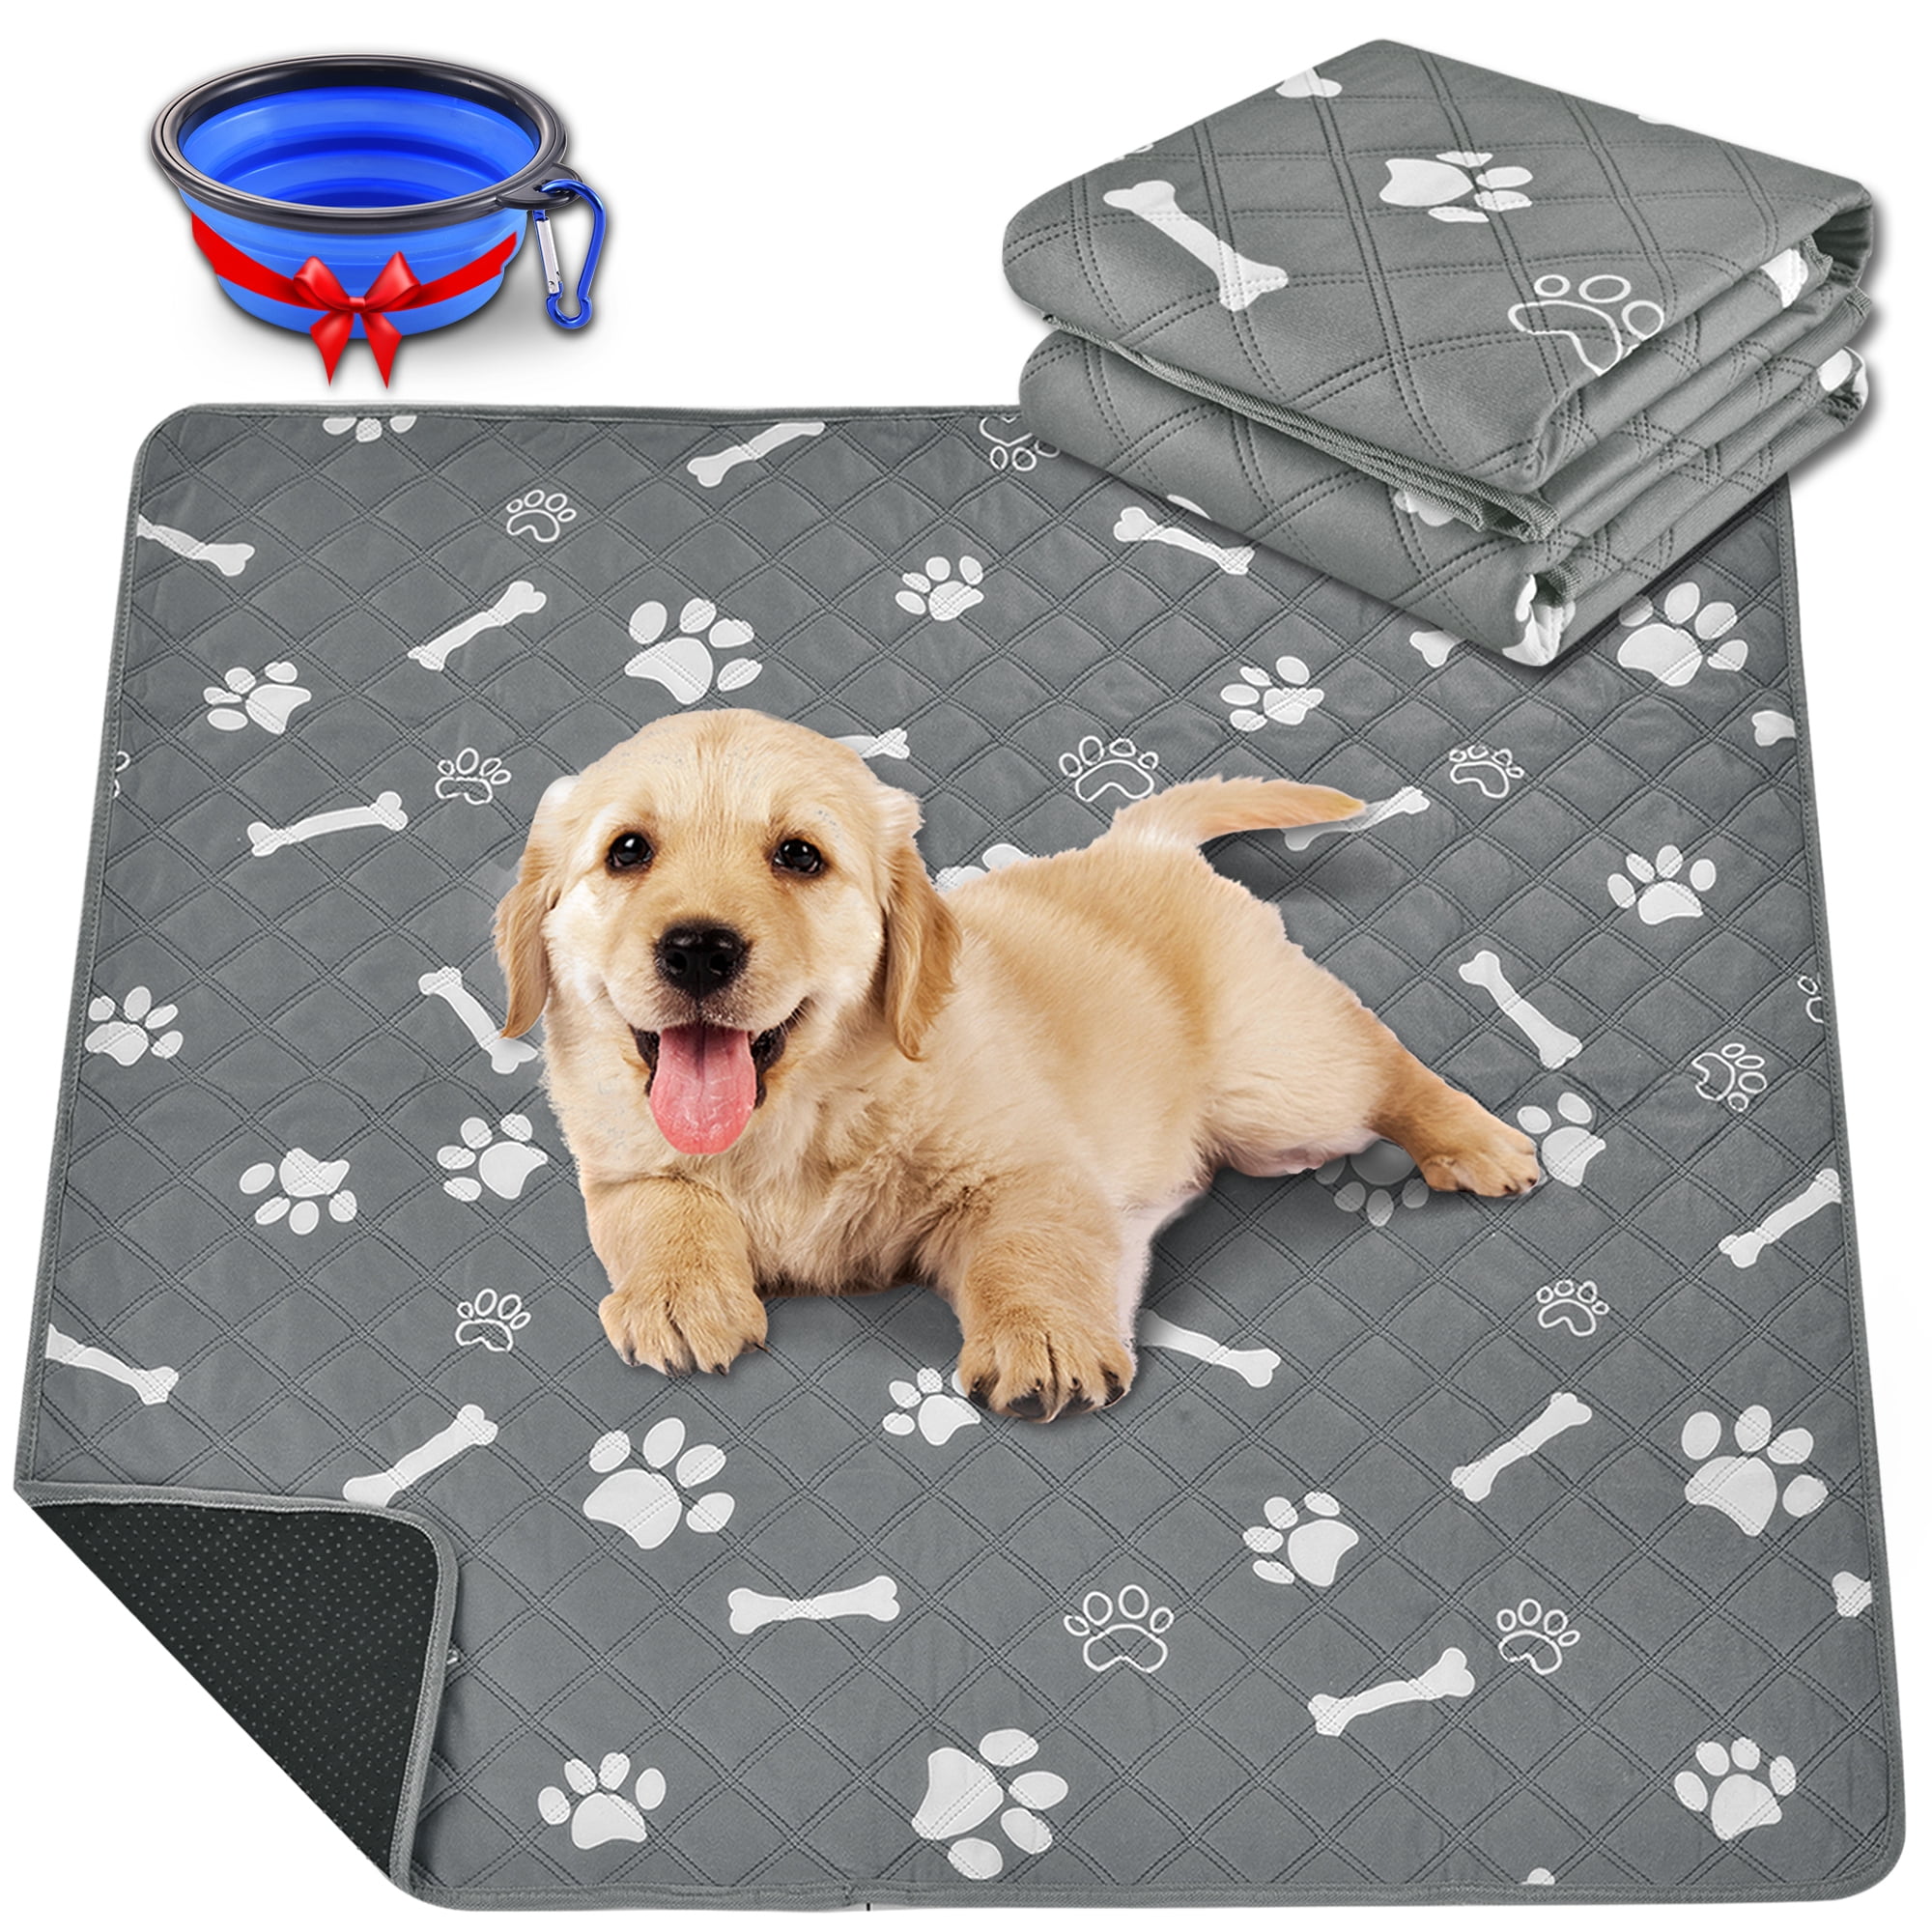 Washable Dog Pee Pads, Reusable Puppy Urine Pads Pet Training Pads